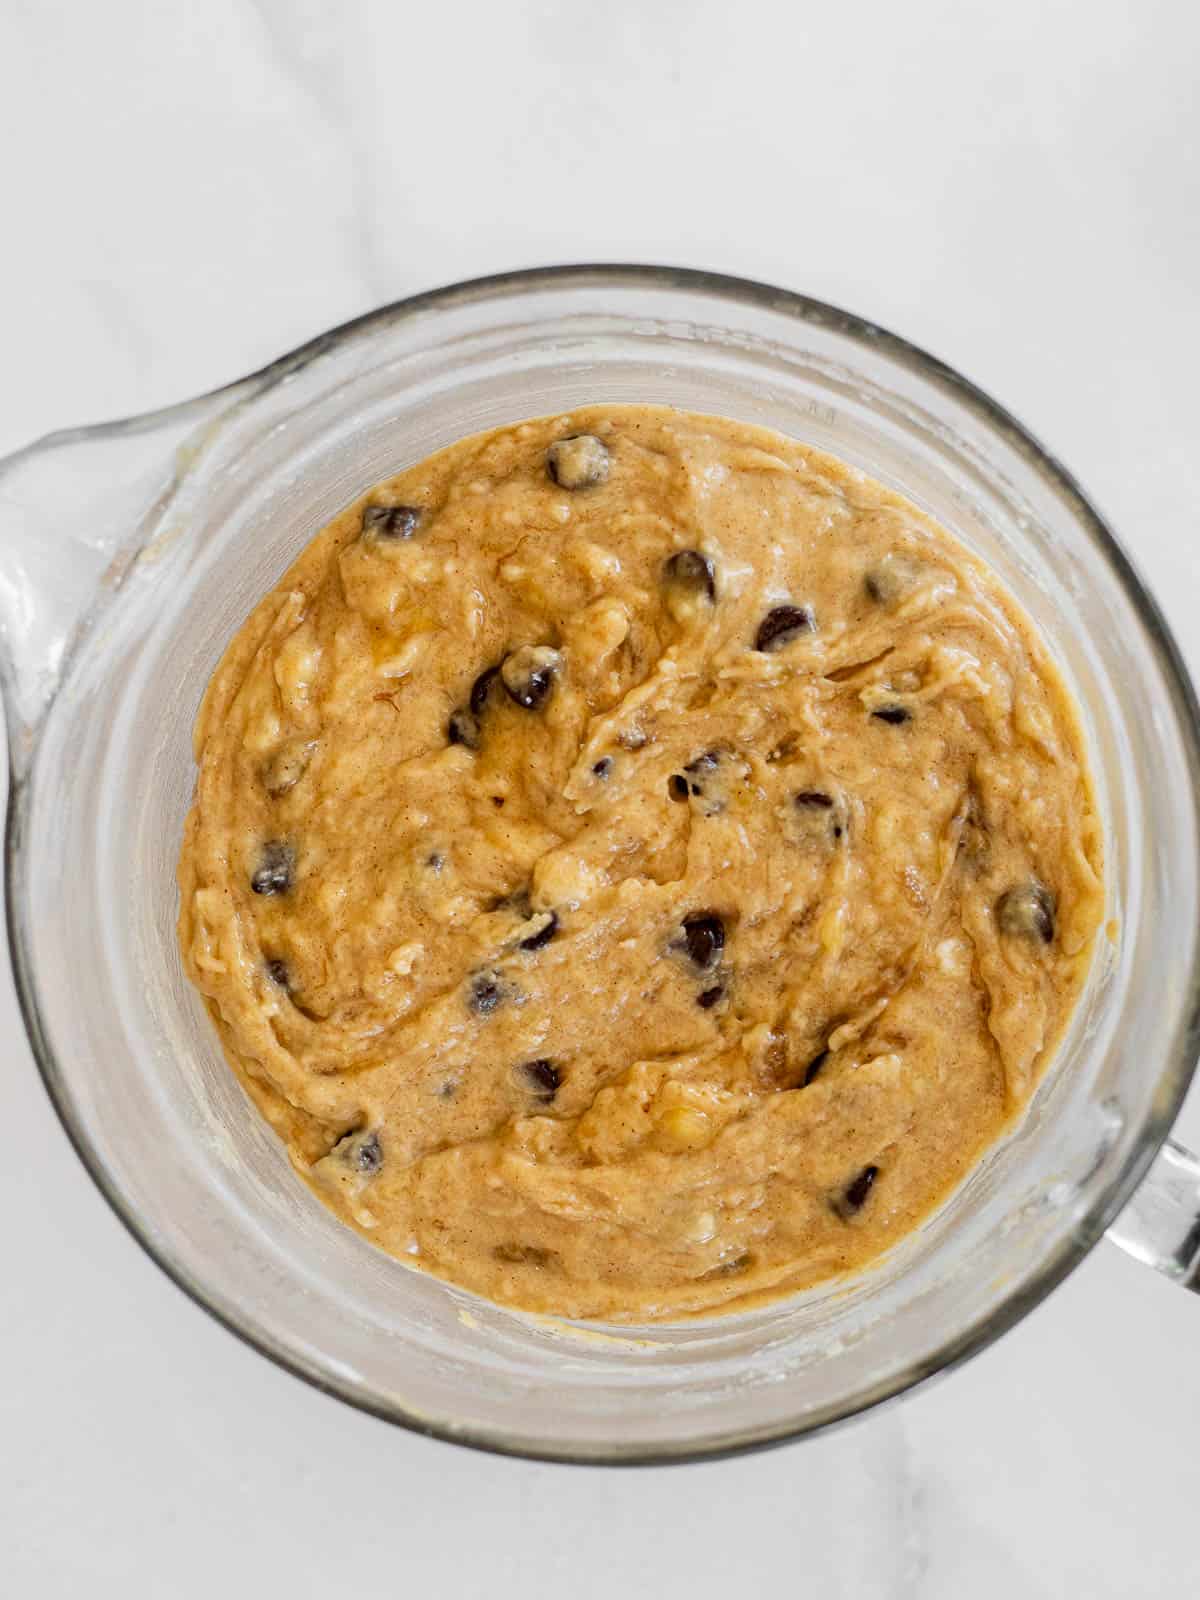 brown butter chocolate chip banana bread batter in a glass mixing bowl.